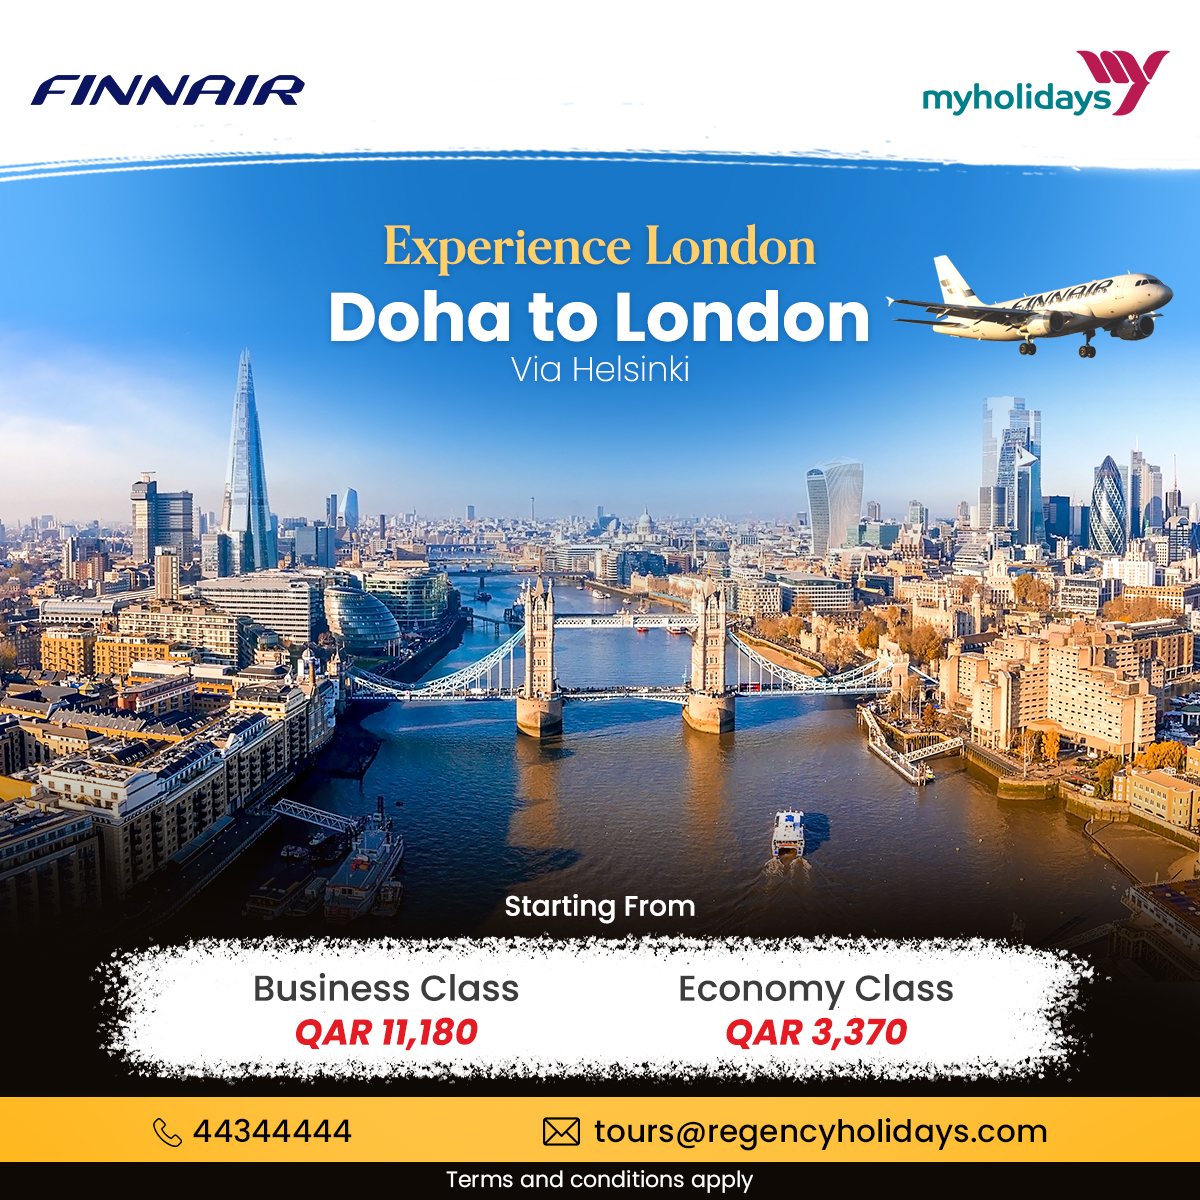 Cherish the world-class hospitality of Finnair Airlines while traveling from Doha to London via Helsinki. Have an amazing time experiencing all the luxurious and well-acclaimed services of this finest airline. 

Contact us for more info.

#finnair #traveltolondon #dohatolondon https://t.co/7ibMszdsgK